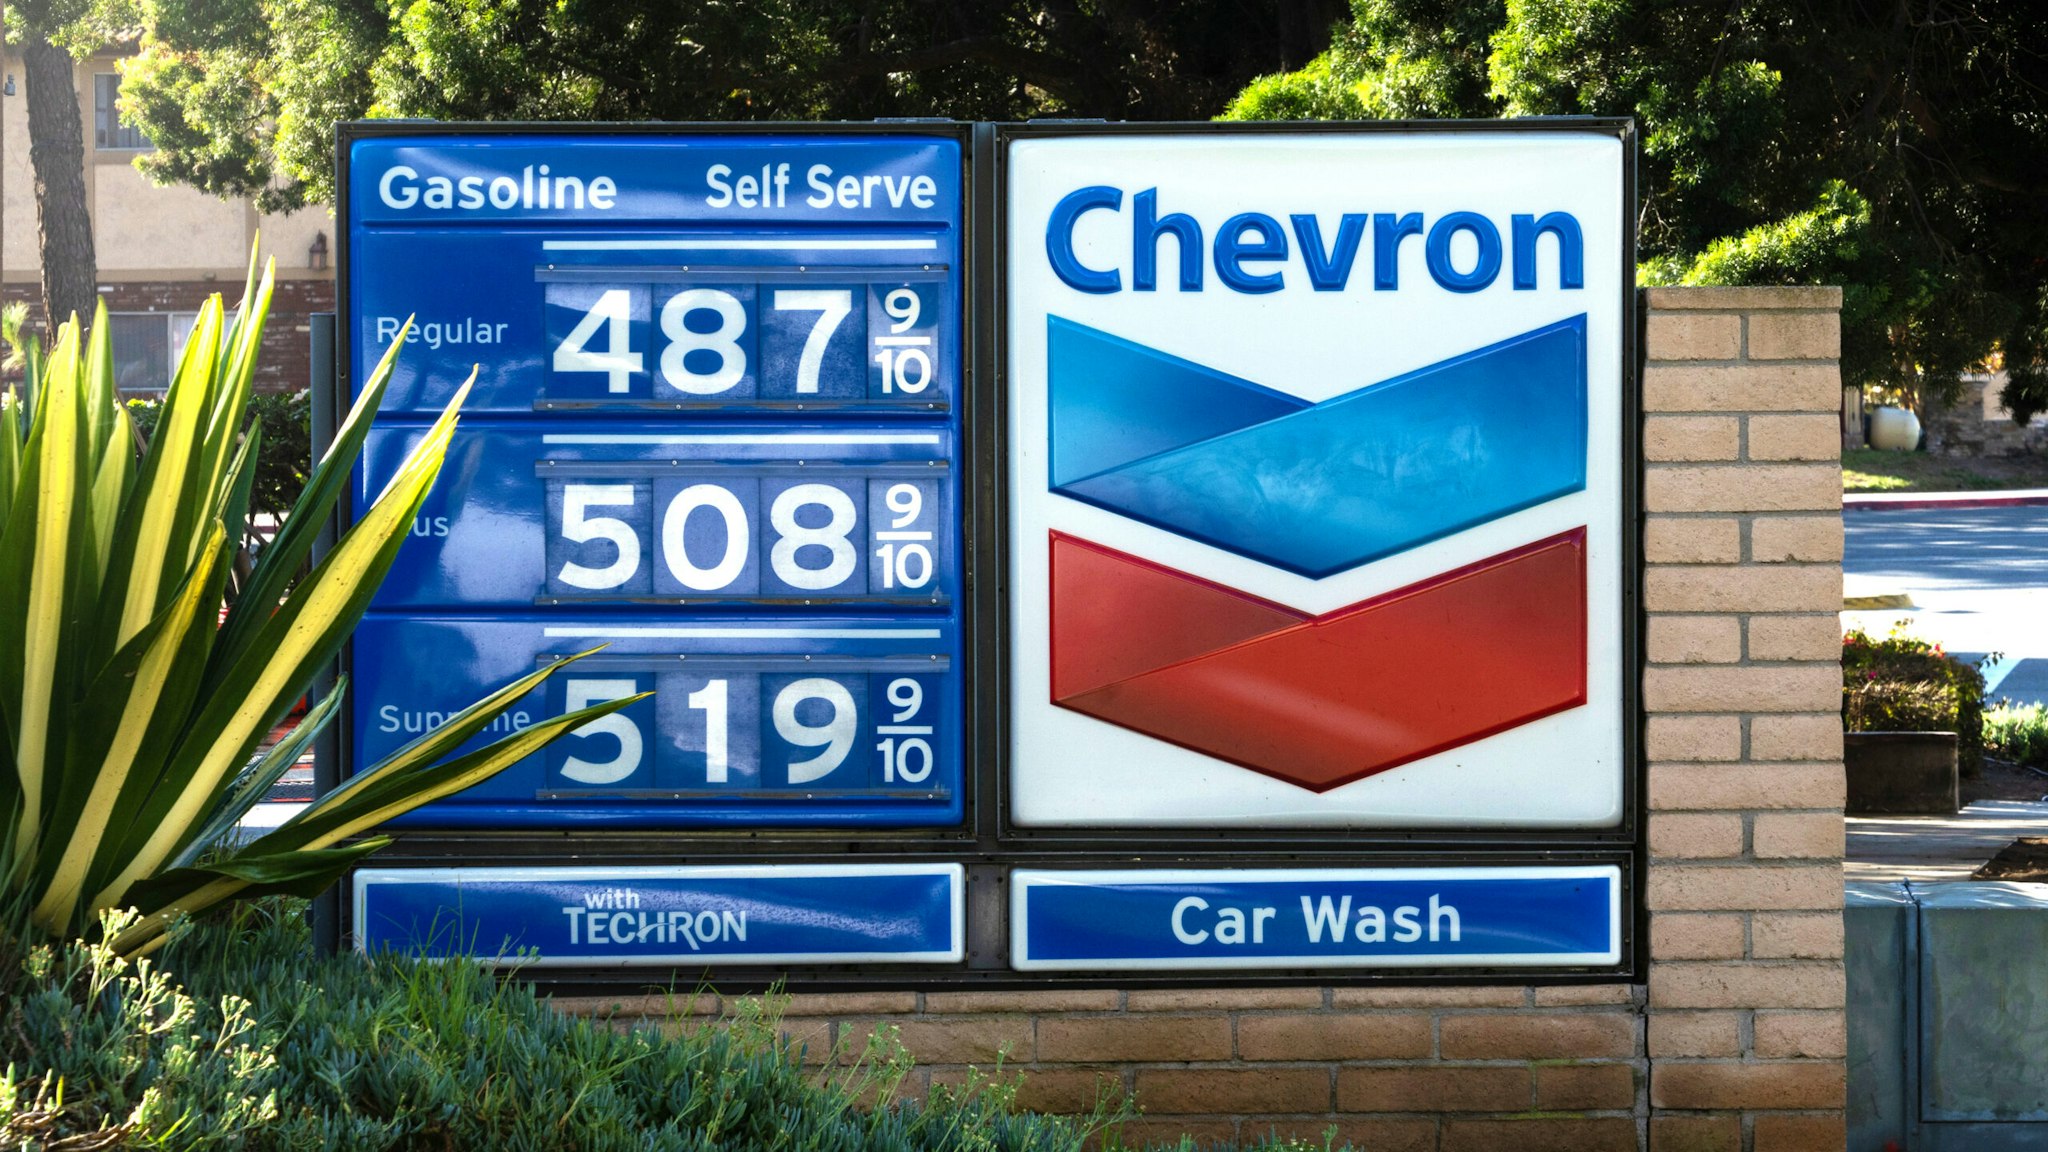 Fuel prices at a Chevron gas station in San Diego, California, U.S., on Thursday, Oct. 21, 2021. American drivers will continue to face historically high fuel prices as gasoline demand surged to the highest in more than a decade.